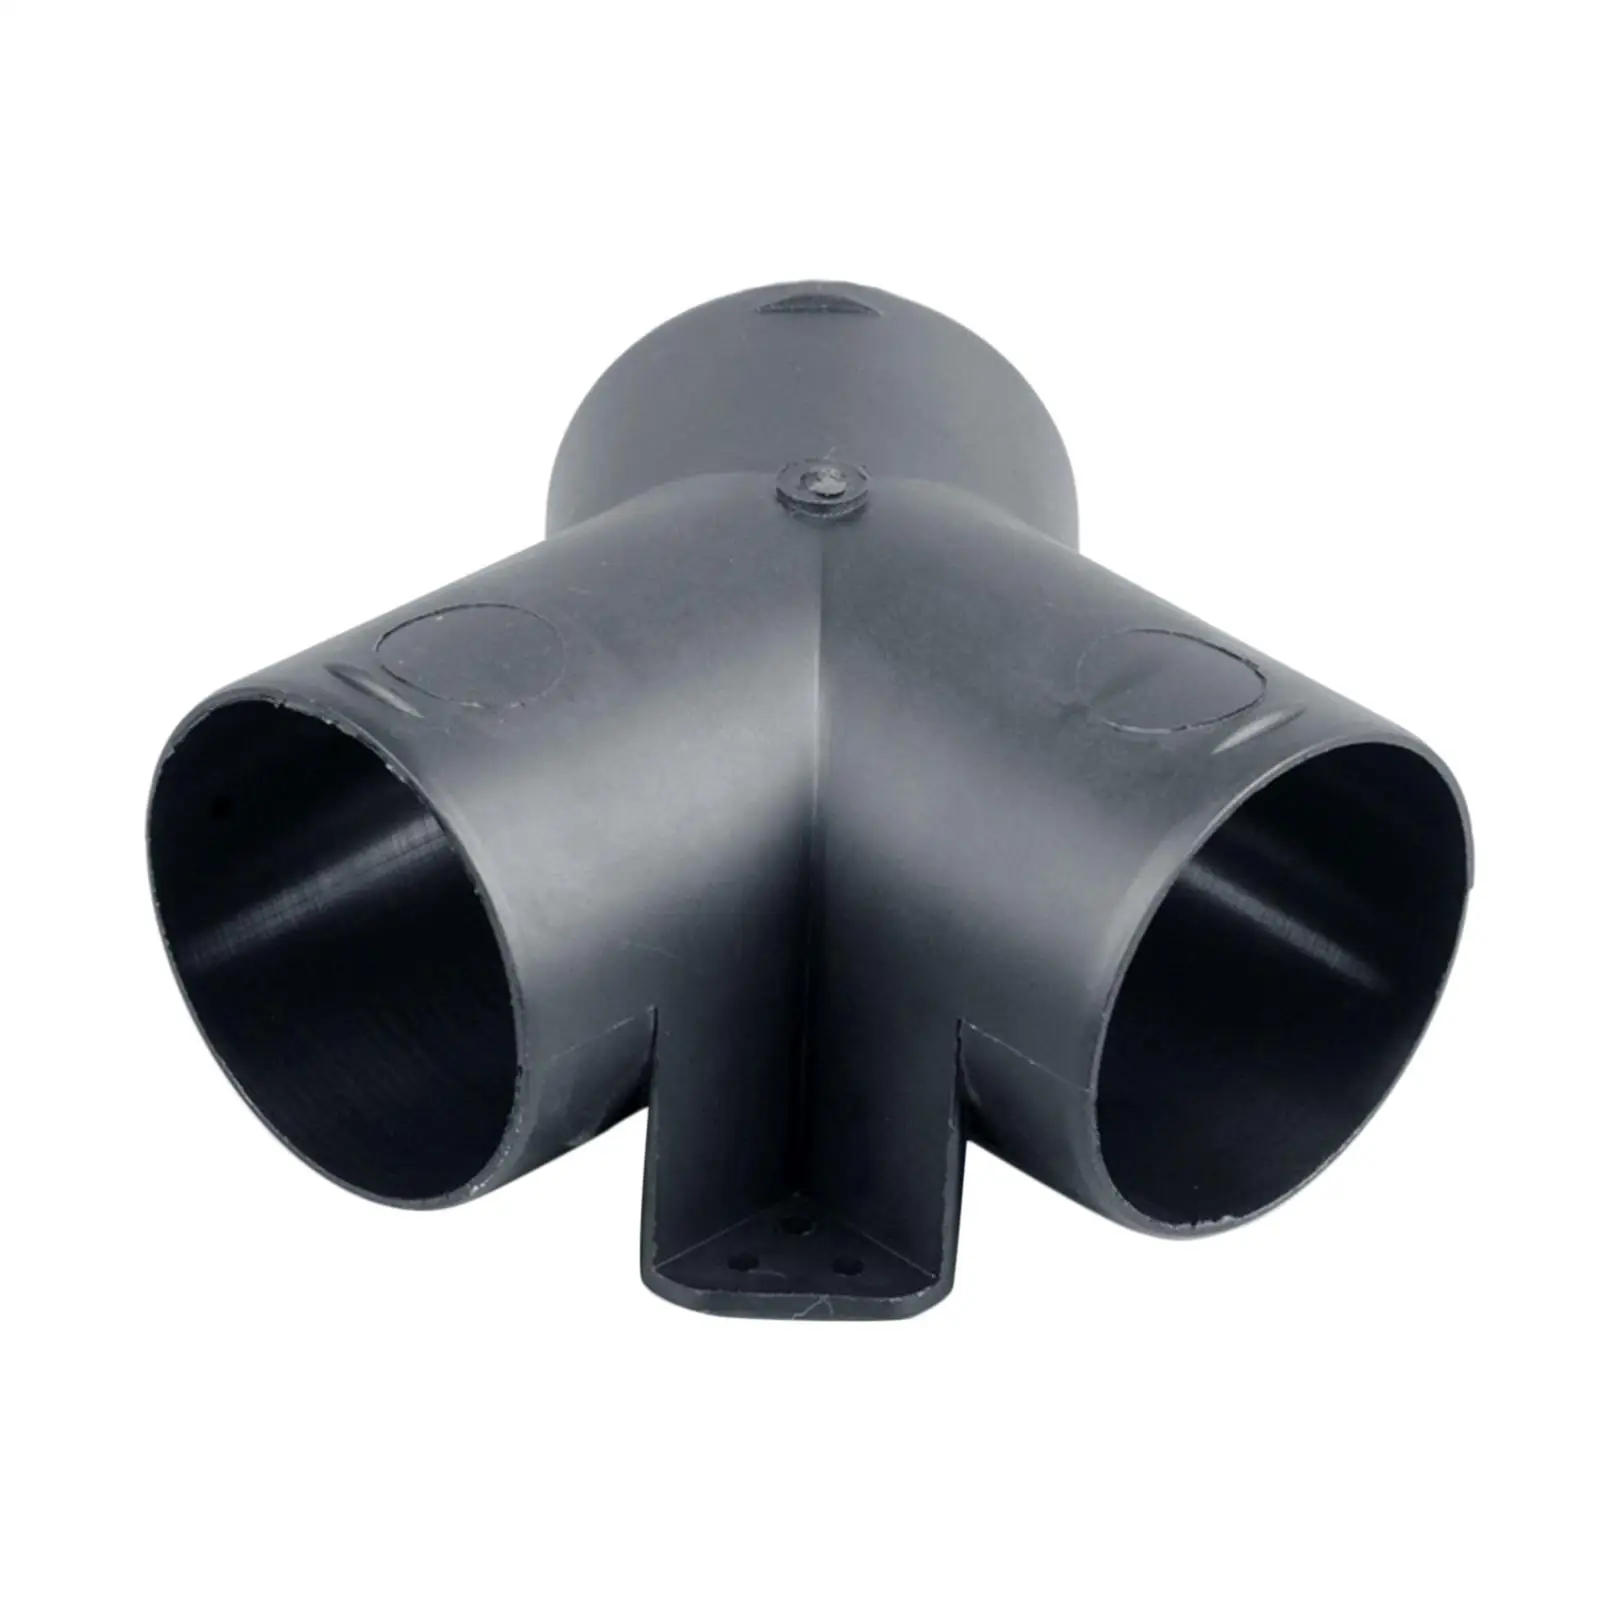 Car Heater Air Vent Ducting High Performance Y Shaped Heater Duct Vent Heater Pipe Ducting for Parking Heater